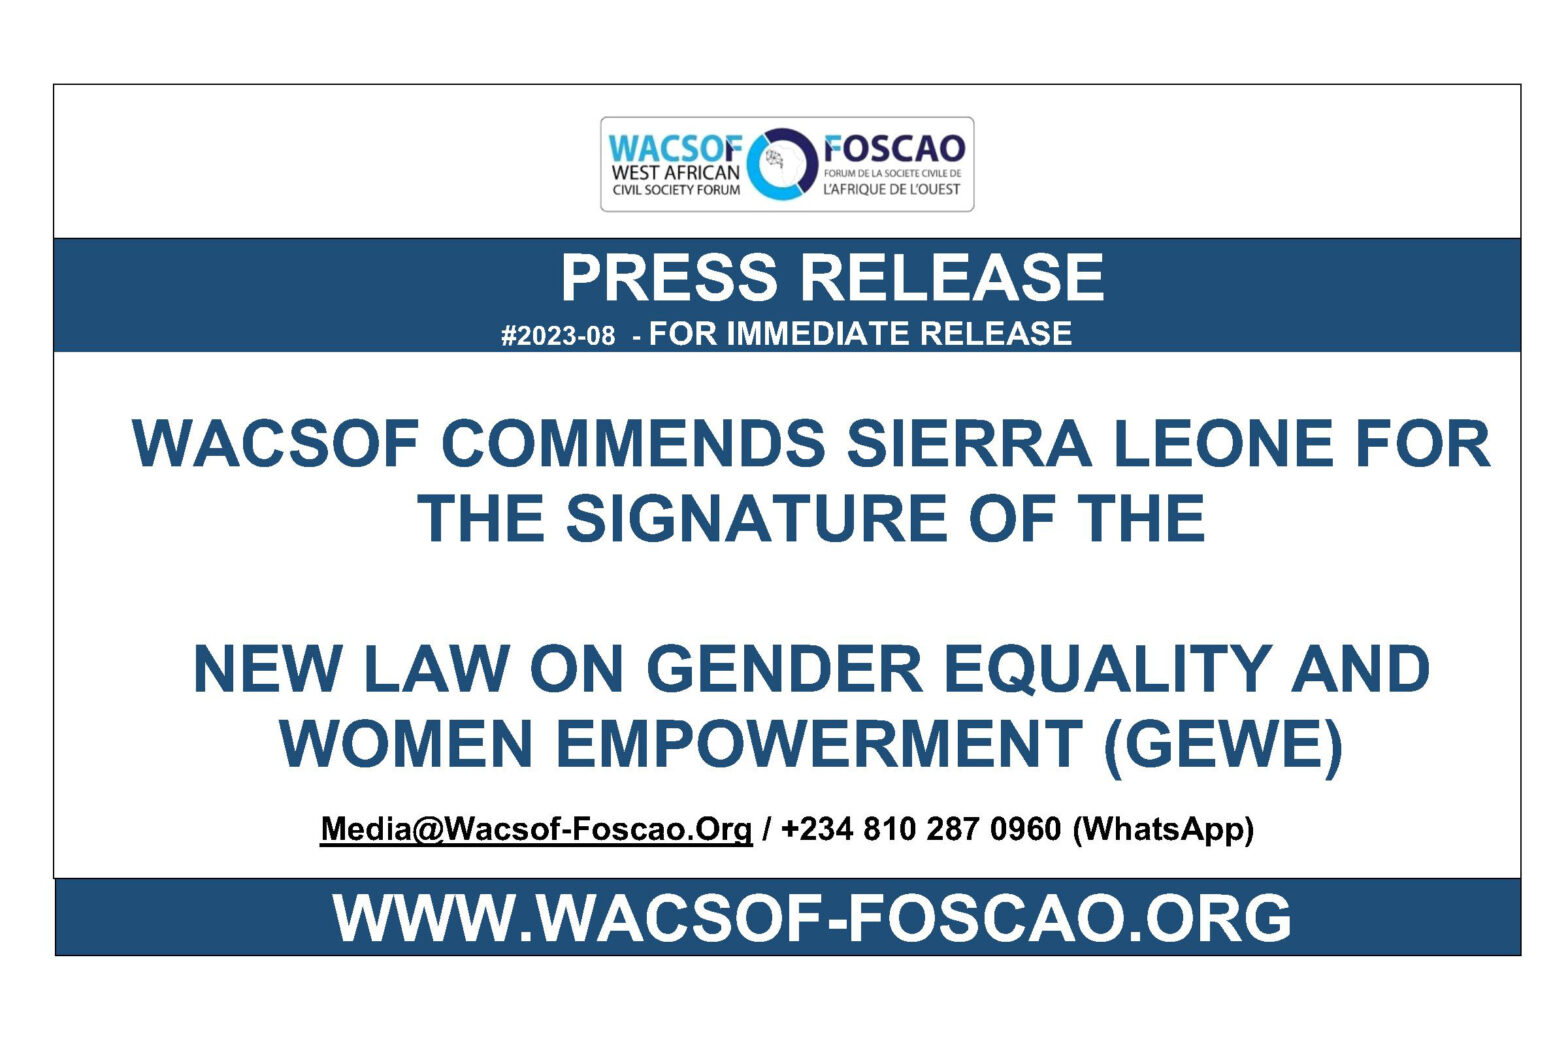 WACSOF COMMENDS SIERRA LEONE FOR THE SIGNATURE OF THE LAW ON GENDER EQUALITY AND WOMEN EMPOWERMENT (GEWE)